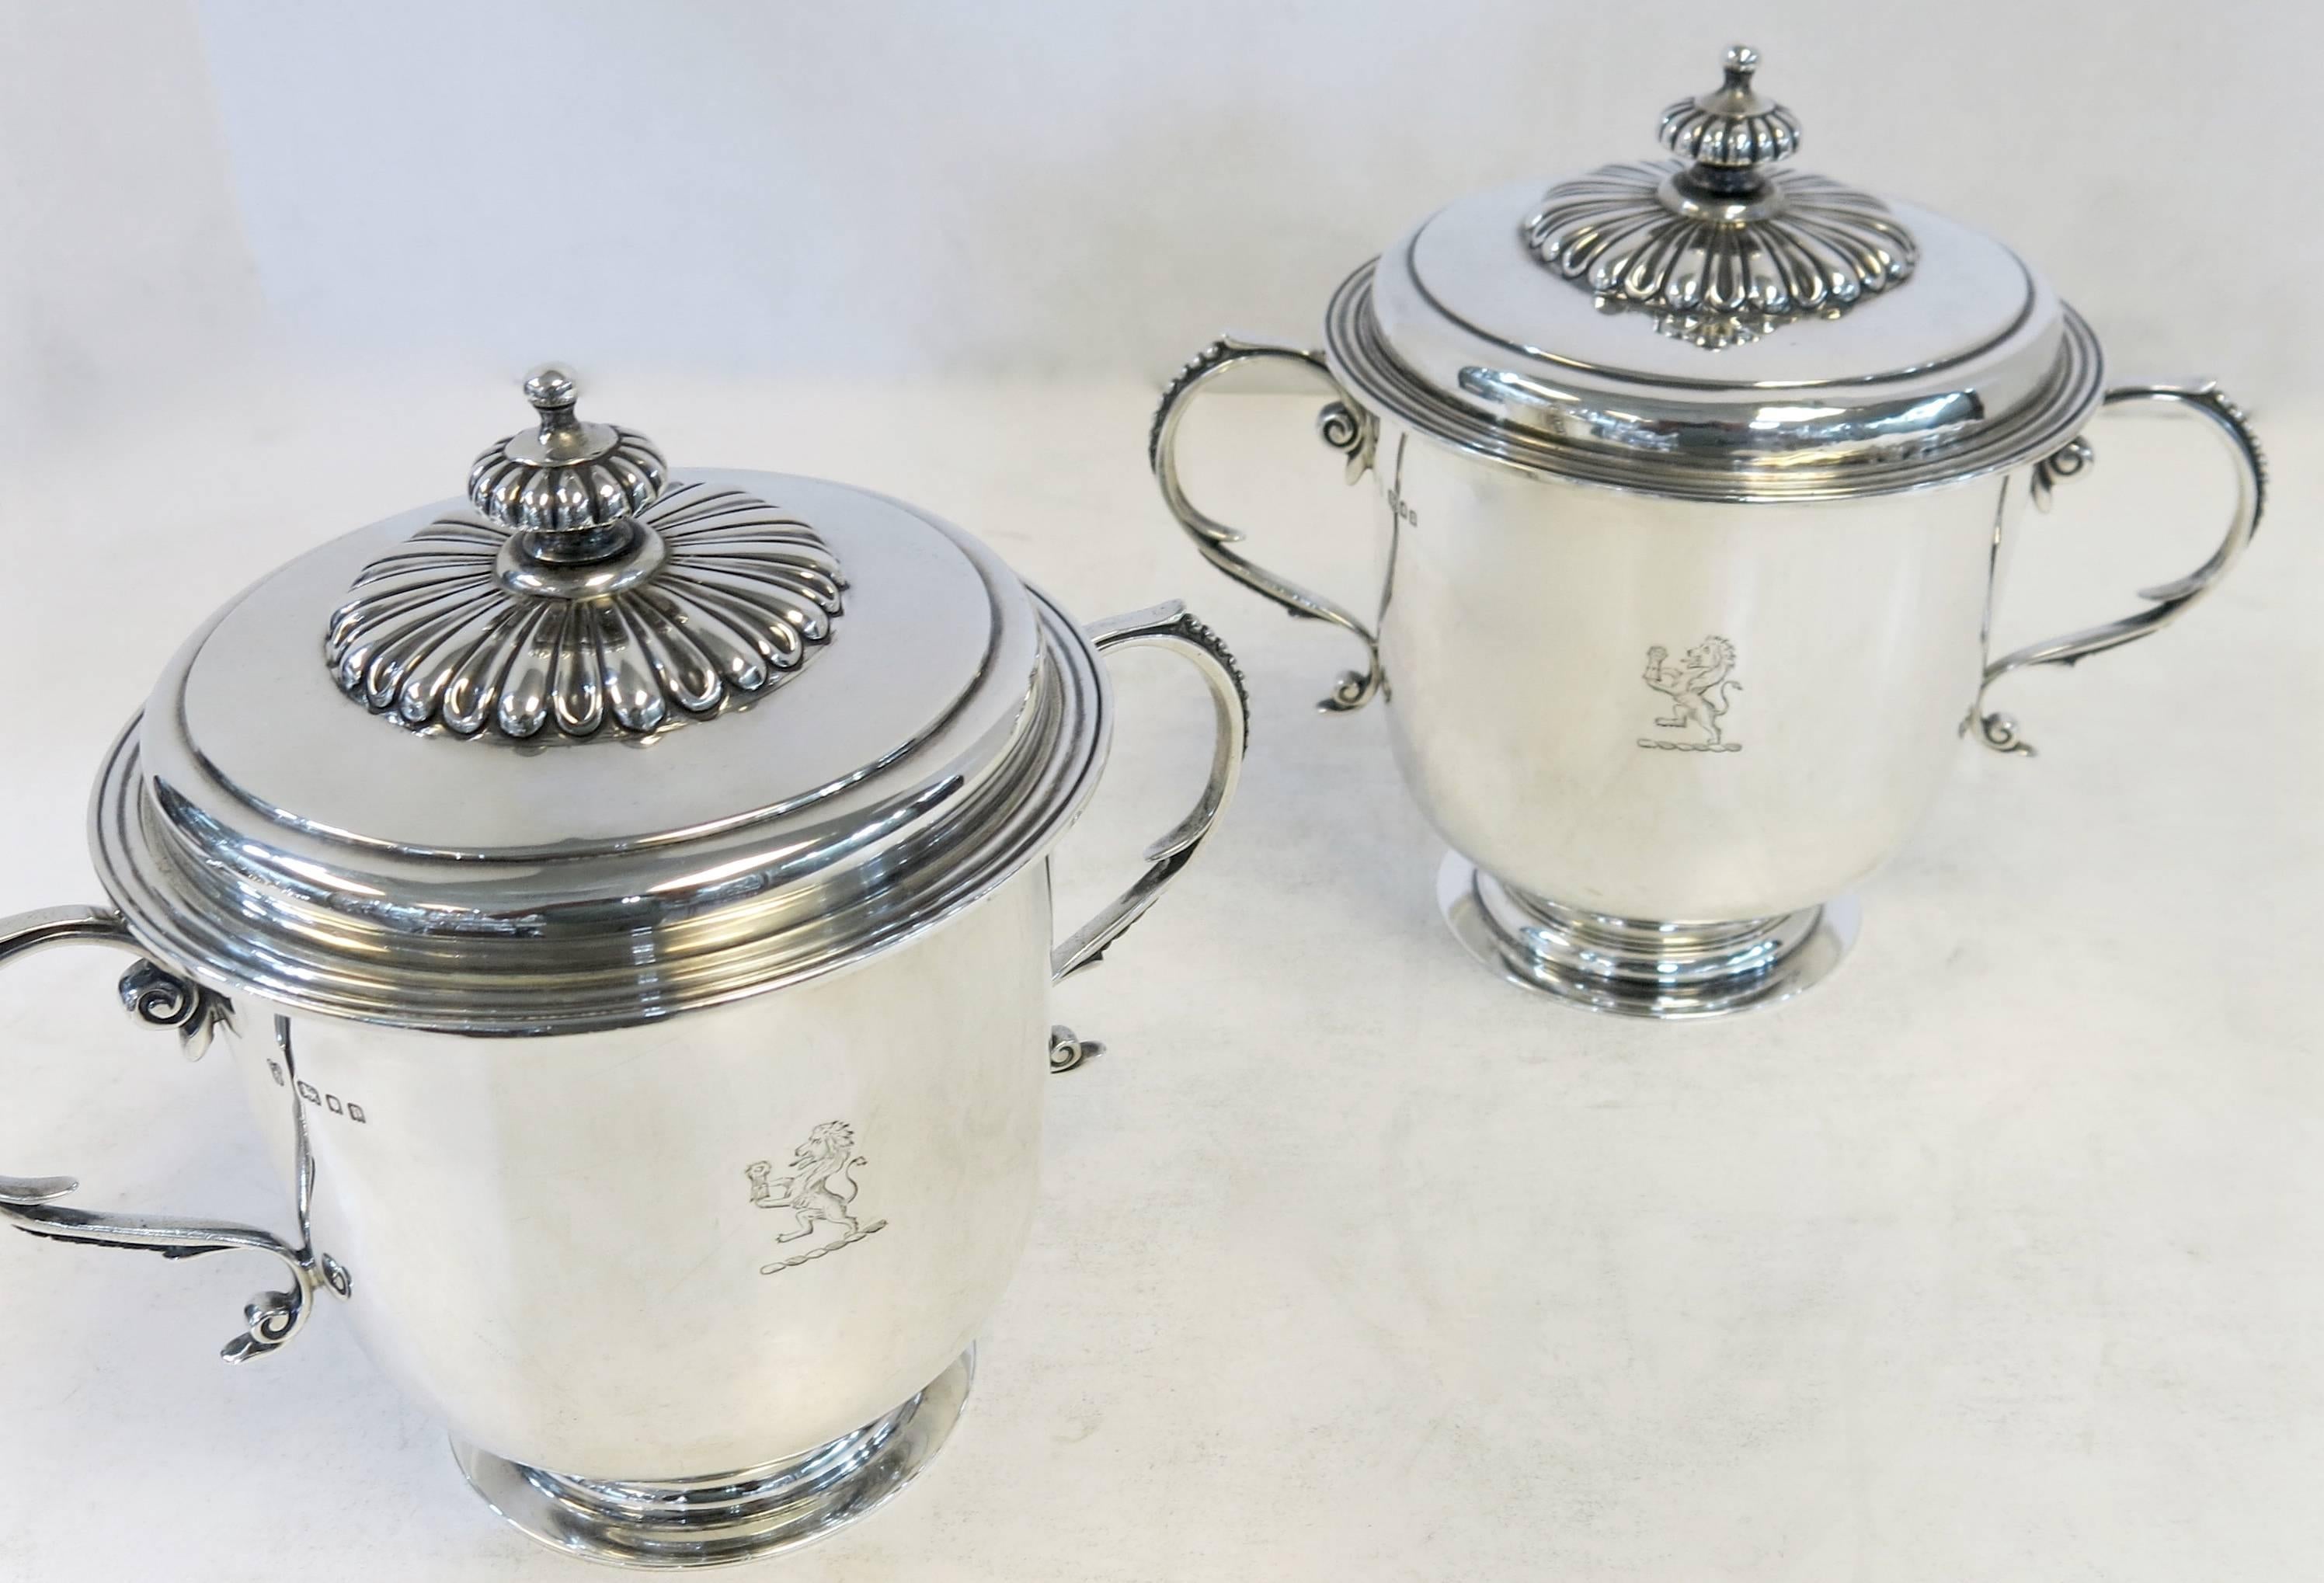 Antique English, sterling silver cup and covers in a Georgian style.
Made by Charles Stewart Harris, London, 1910. 
Both cups are fully and correctly hallmarked, and are hand engraved on one side of each cup with a lion crest. 

Suitable for